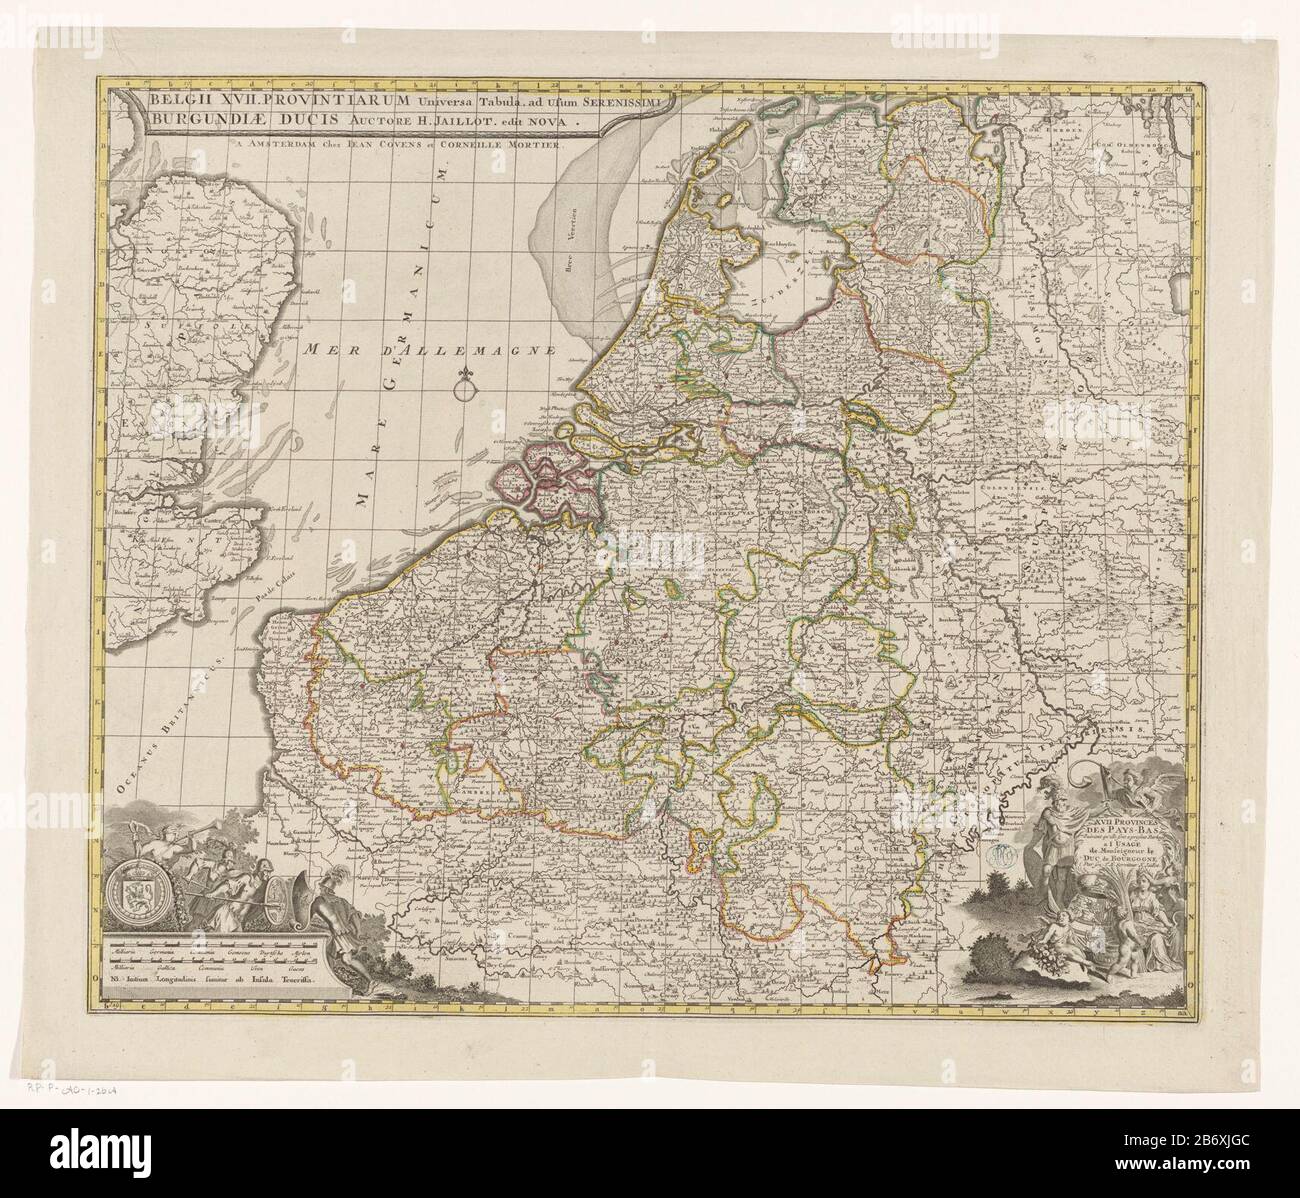 Map of Seventeen ProvinciënBelgii XVII Provintiarum Universalist Tabula ad Usum Serenissimi (...) (title object) XVII Provinces des Pays-Bas (...) (title object) Object type: picture postcard Item number RP-P-AO-1-26ACatalogusreferentie: Van der Heijden 237-4 (4) Description: Map of the Seventeen Provinces. Right a cartouche with three putti, a soldier and a farmer. Bottom left two shell sticks cartouche with fighting soldiers and a shield: Milli Aria Germanica COMMUNIA and Milli Aria Gallica COMMUNIA. Along the edges of the print a degree distribution. The print features a zoekrooster. Manufa Stock Photo